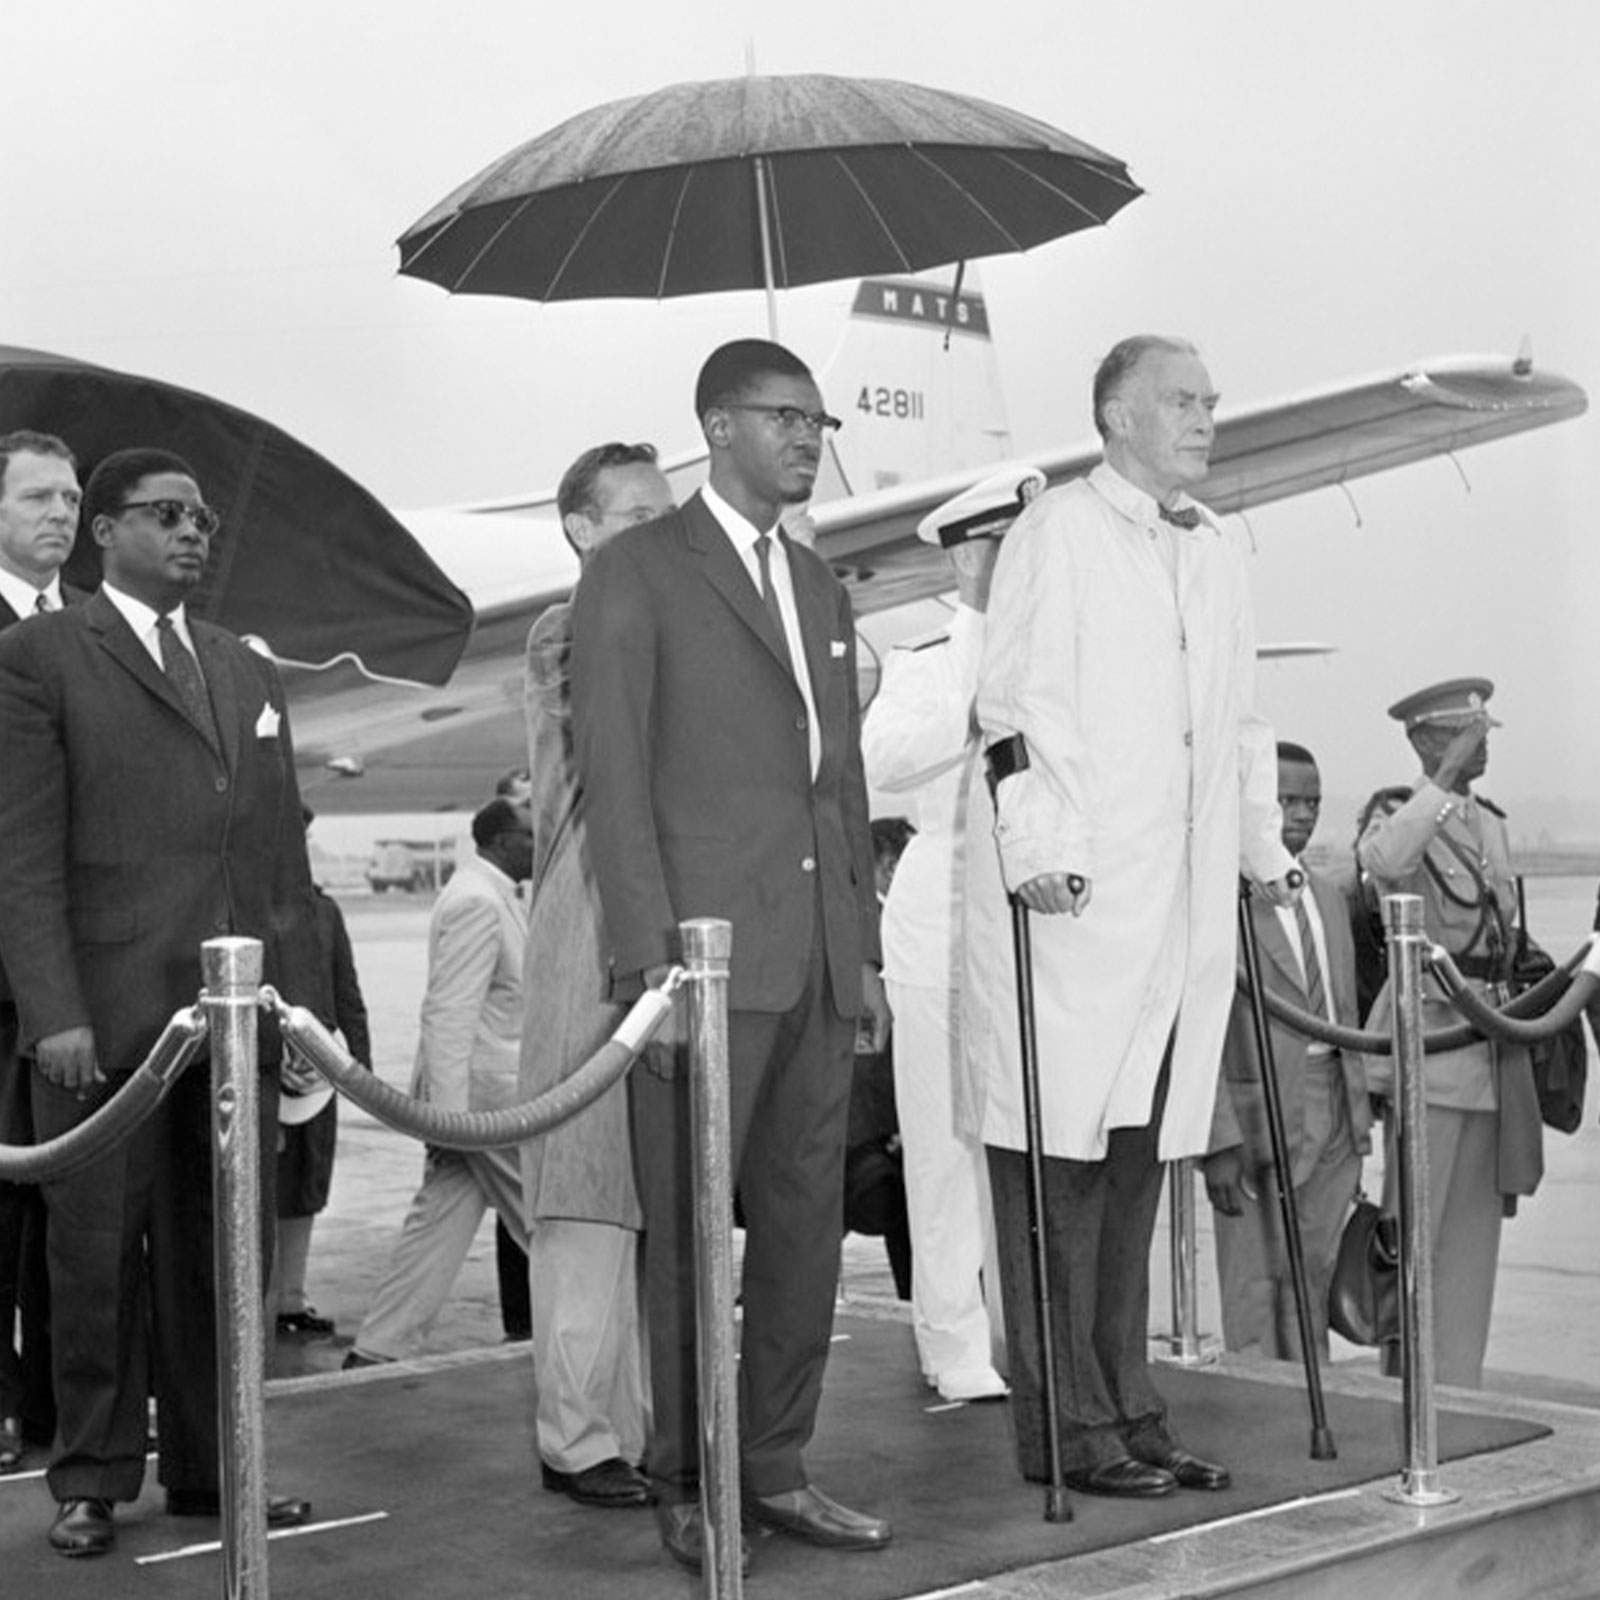 Lumumba, left, of the Republic of the Congo and U.S. Secretary of State Christian Herter stand under an umbrella in the rain during ceremonies at the National Airport in Arlington, Va., July 27, 1960. 